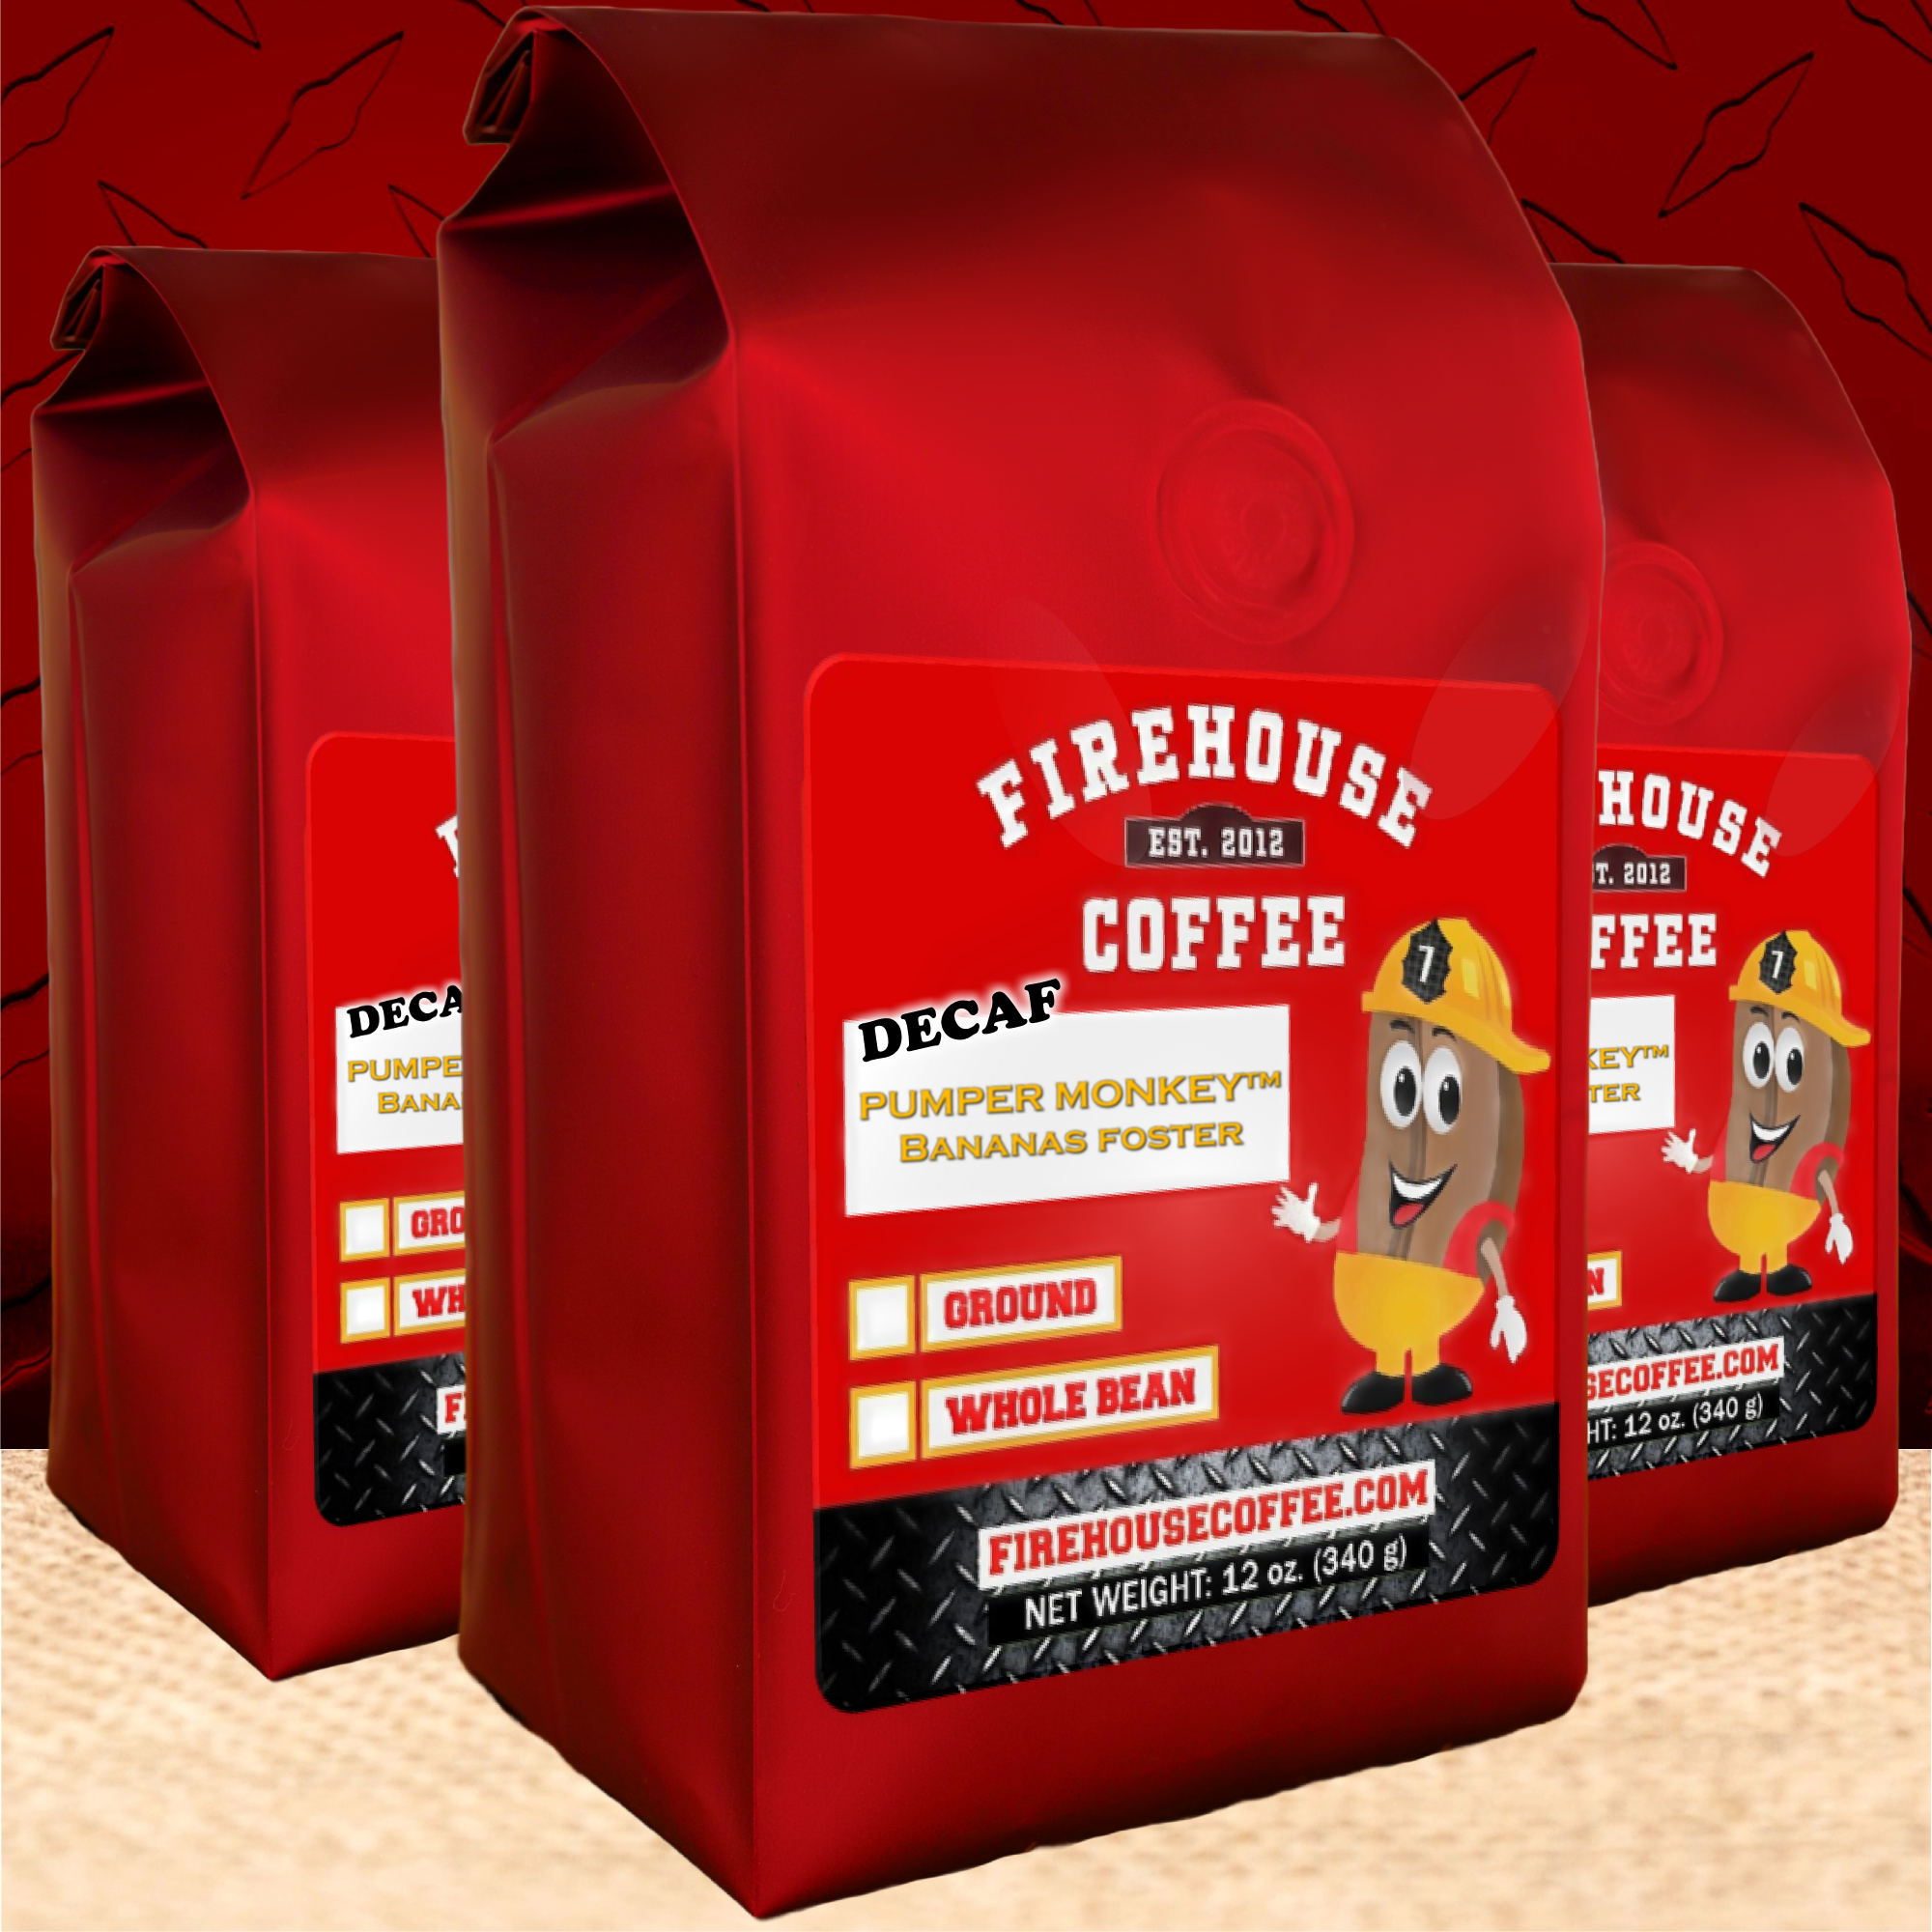 12 oz bags of Bananas Foster Decaf Coffee